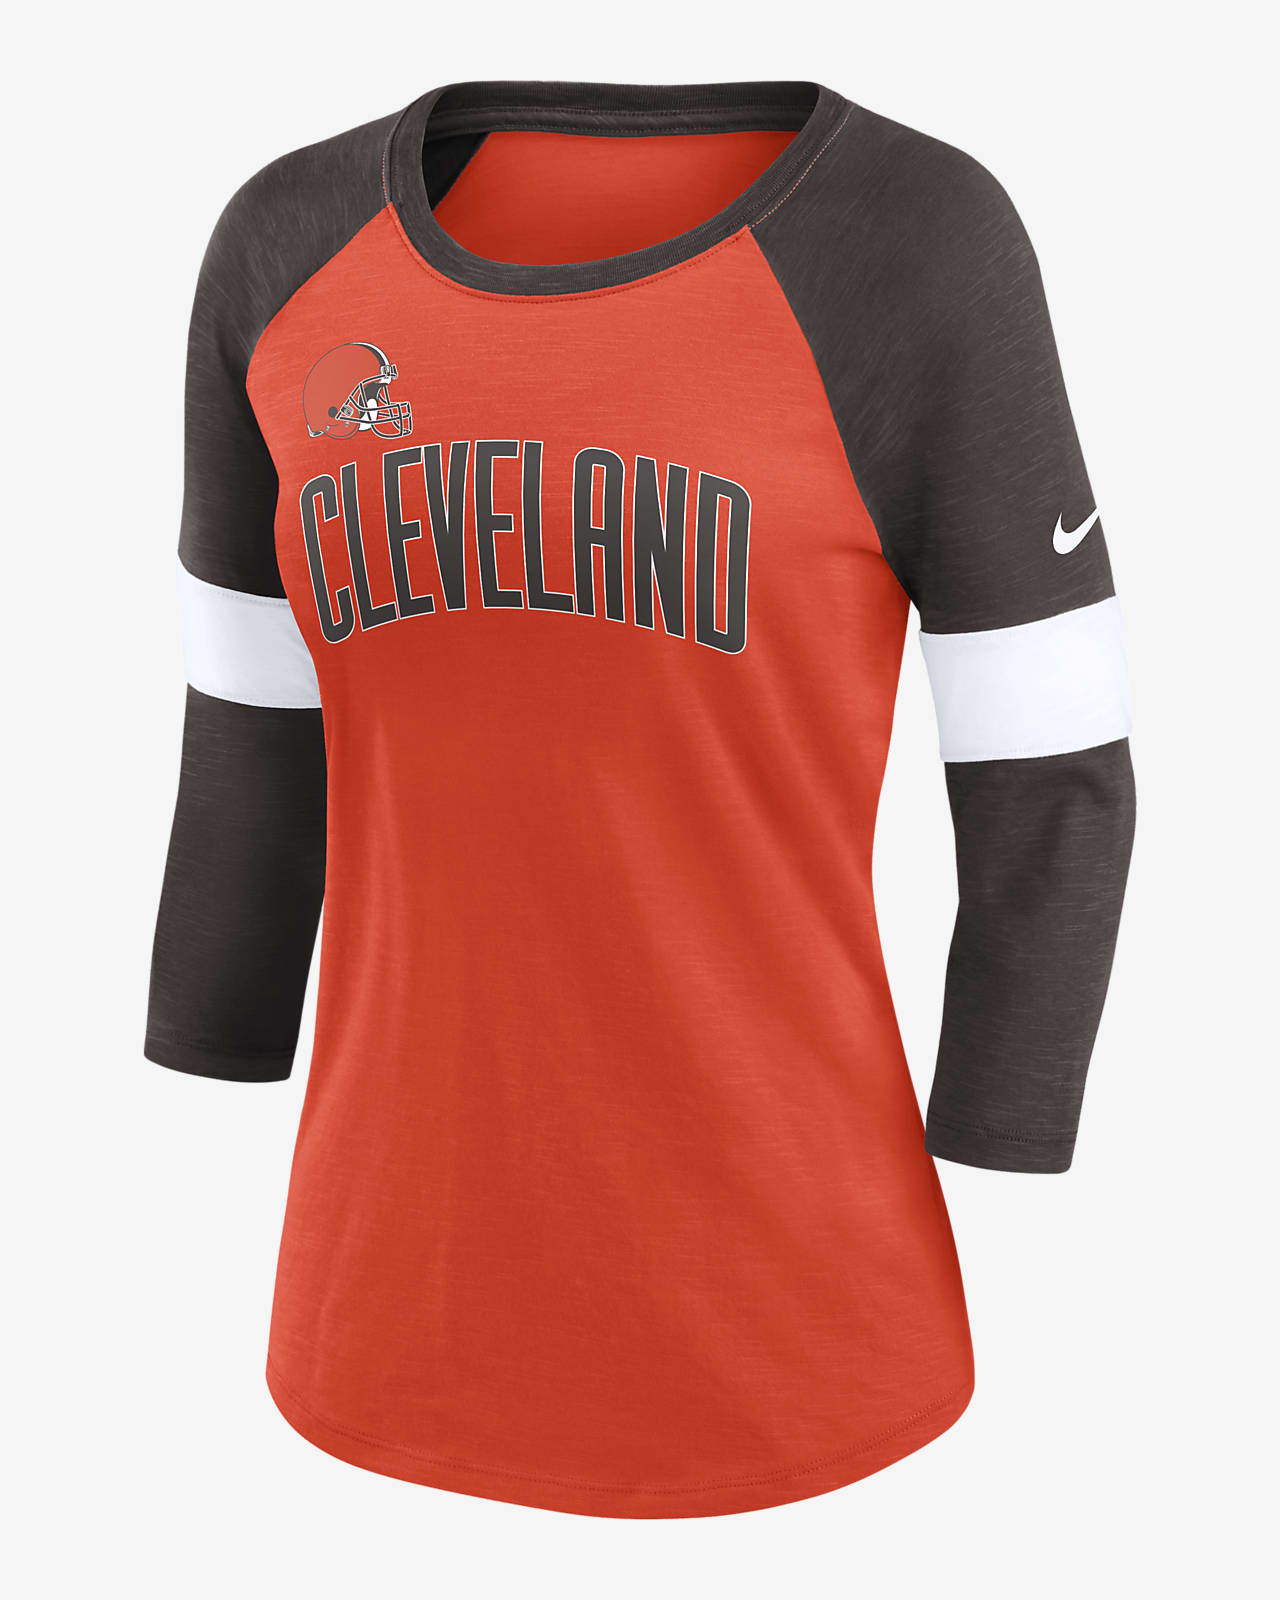 cleveland browns jerseys for sale